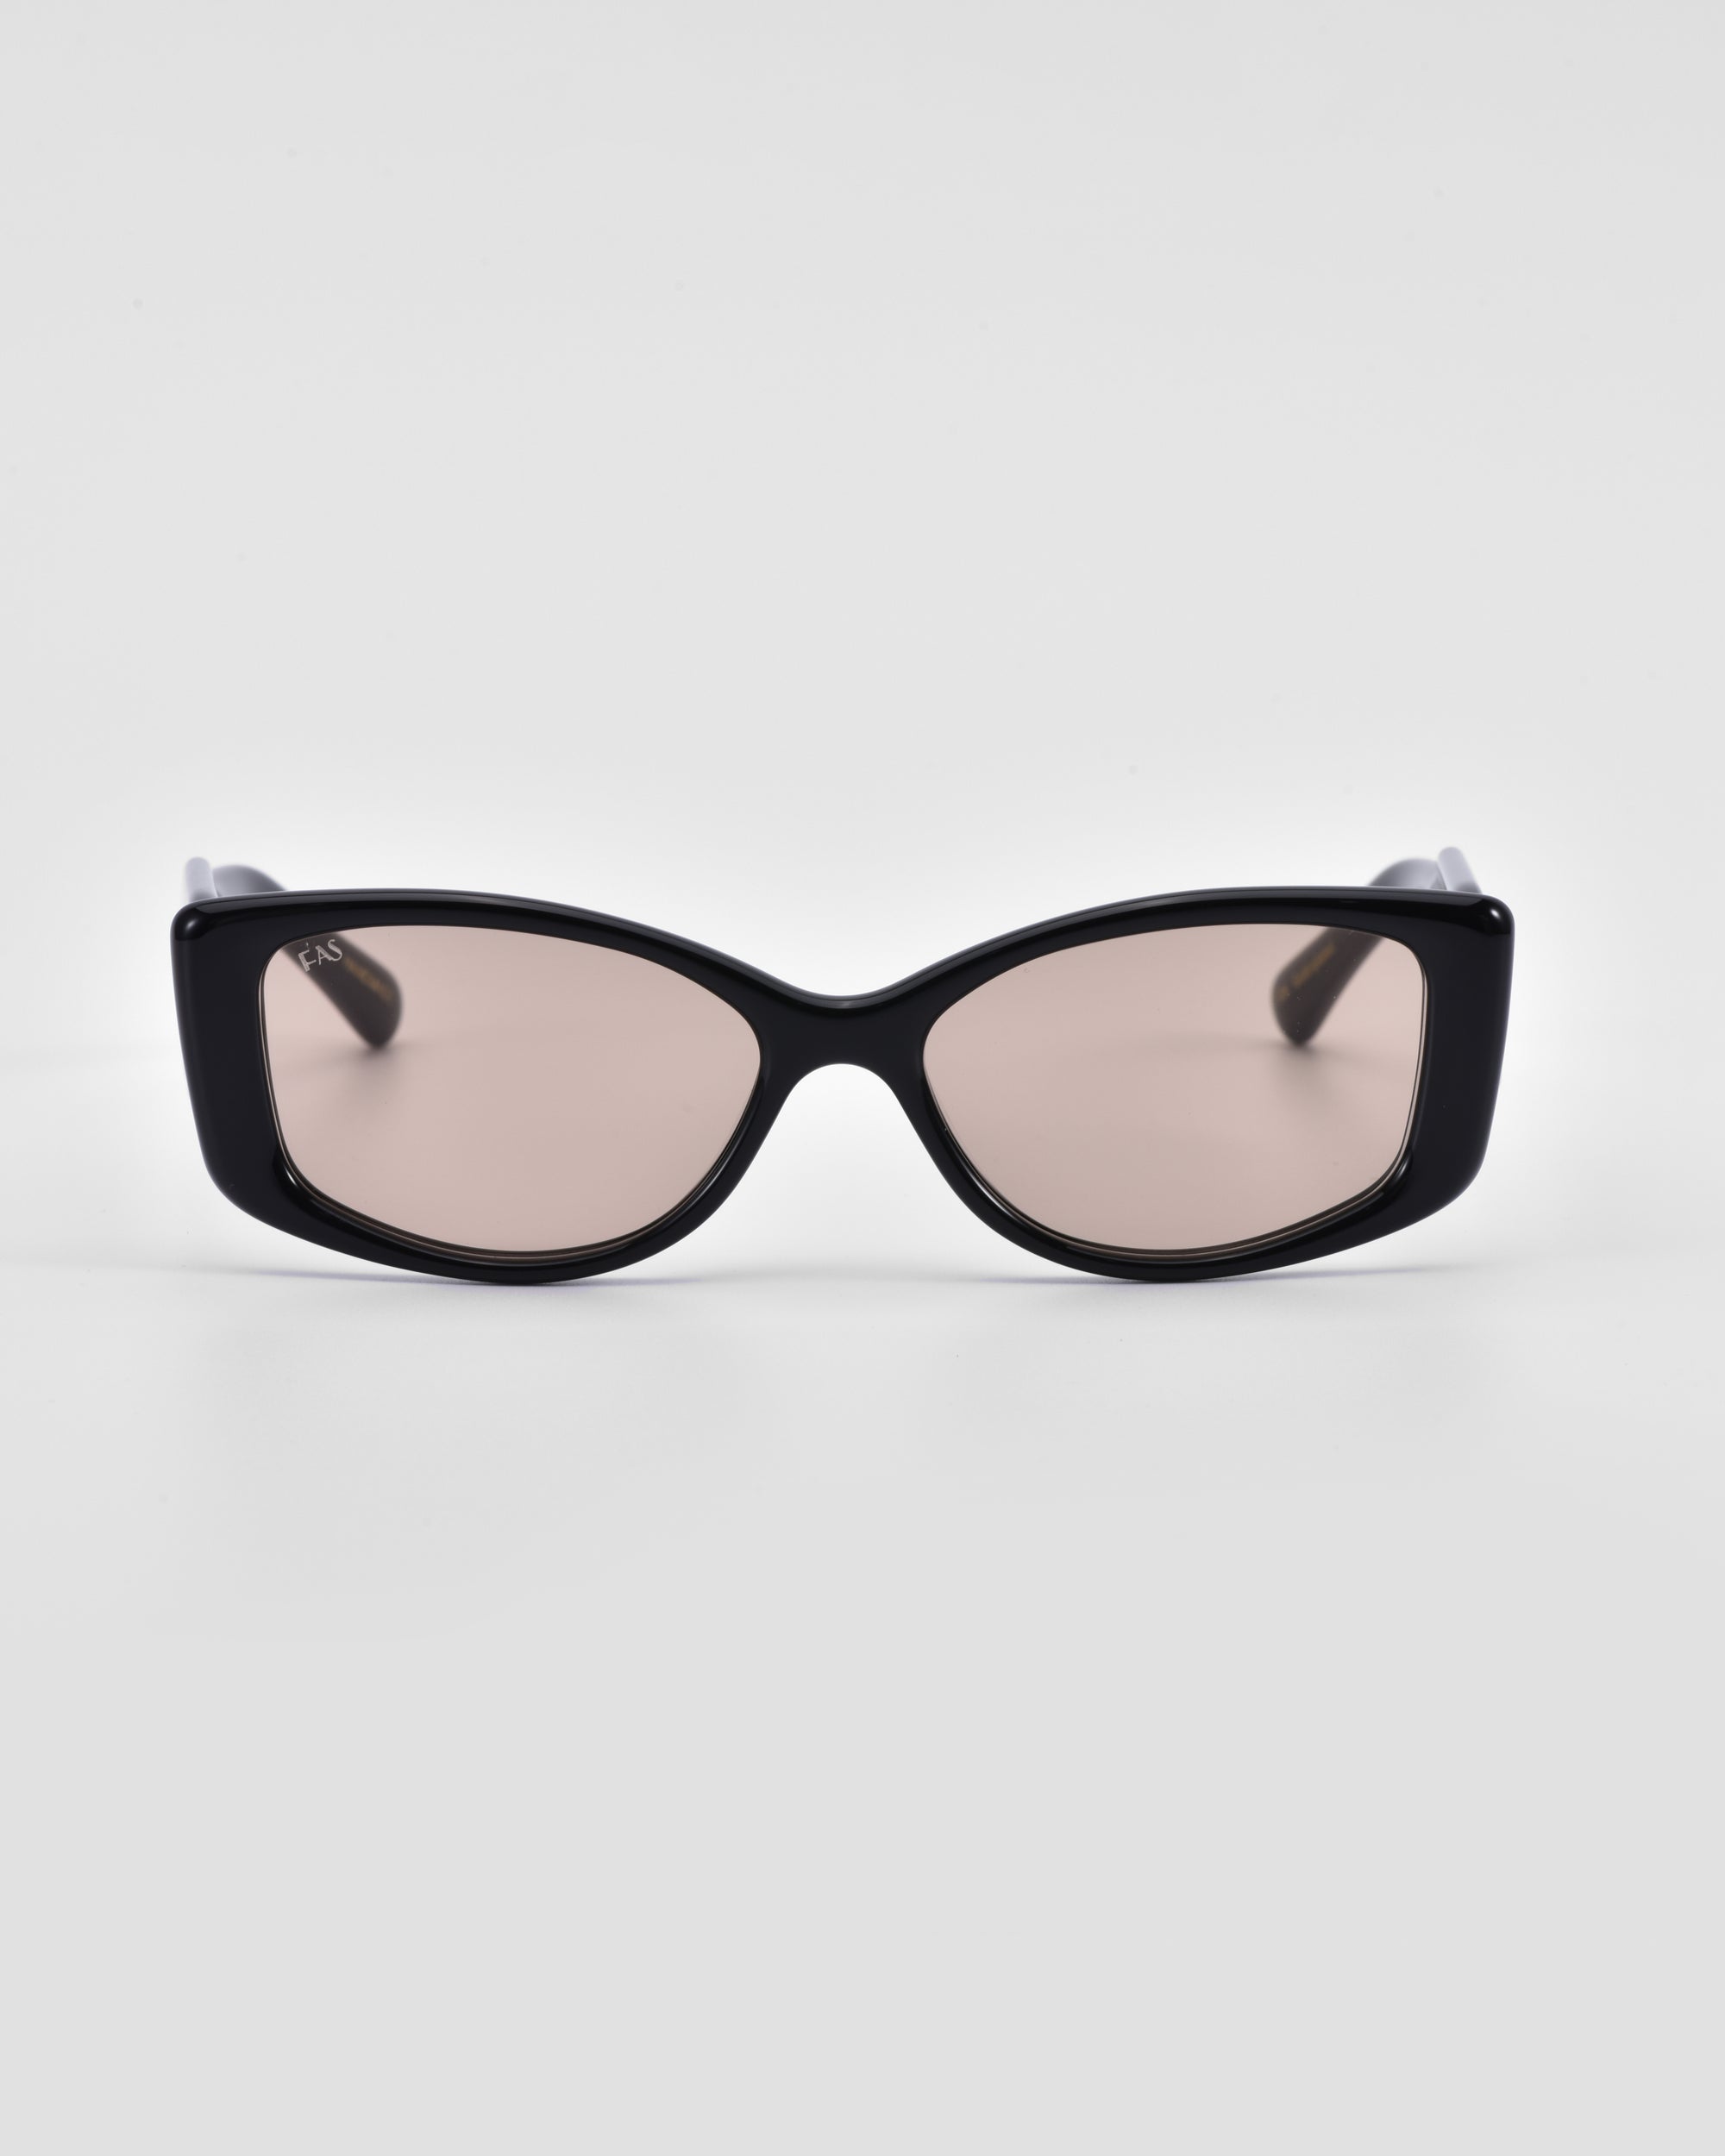 A pair of Mene sunglasses by For Art's Sake® with light brown tinted lenses set against a plain white background. The frames have a sleek, modern design, exuding an air of luxury.